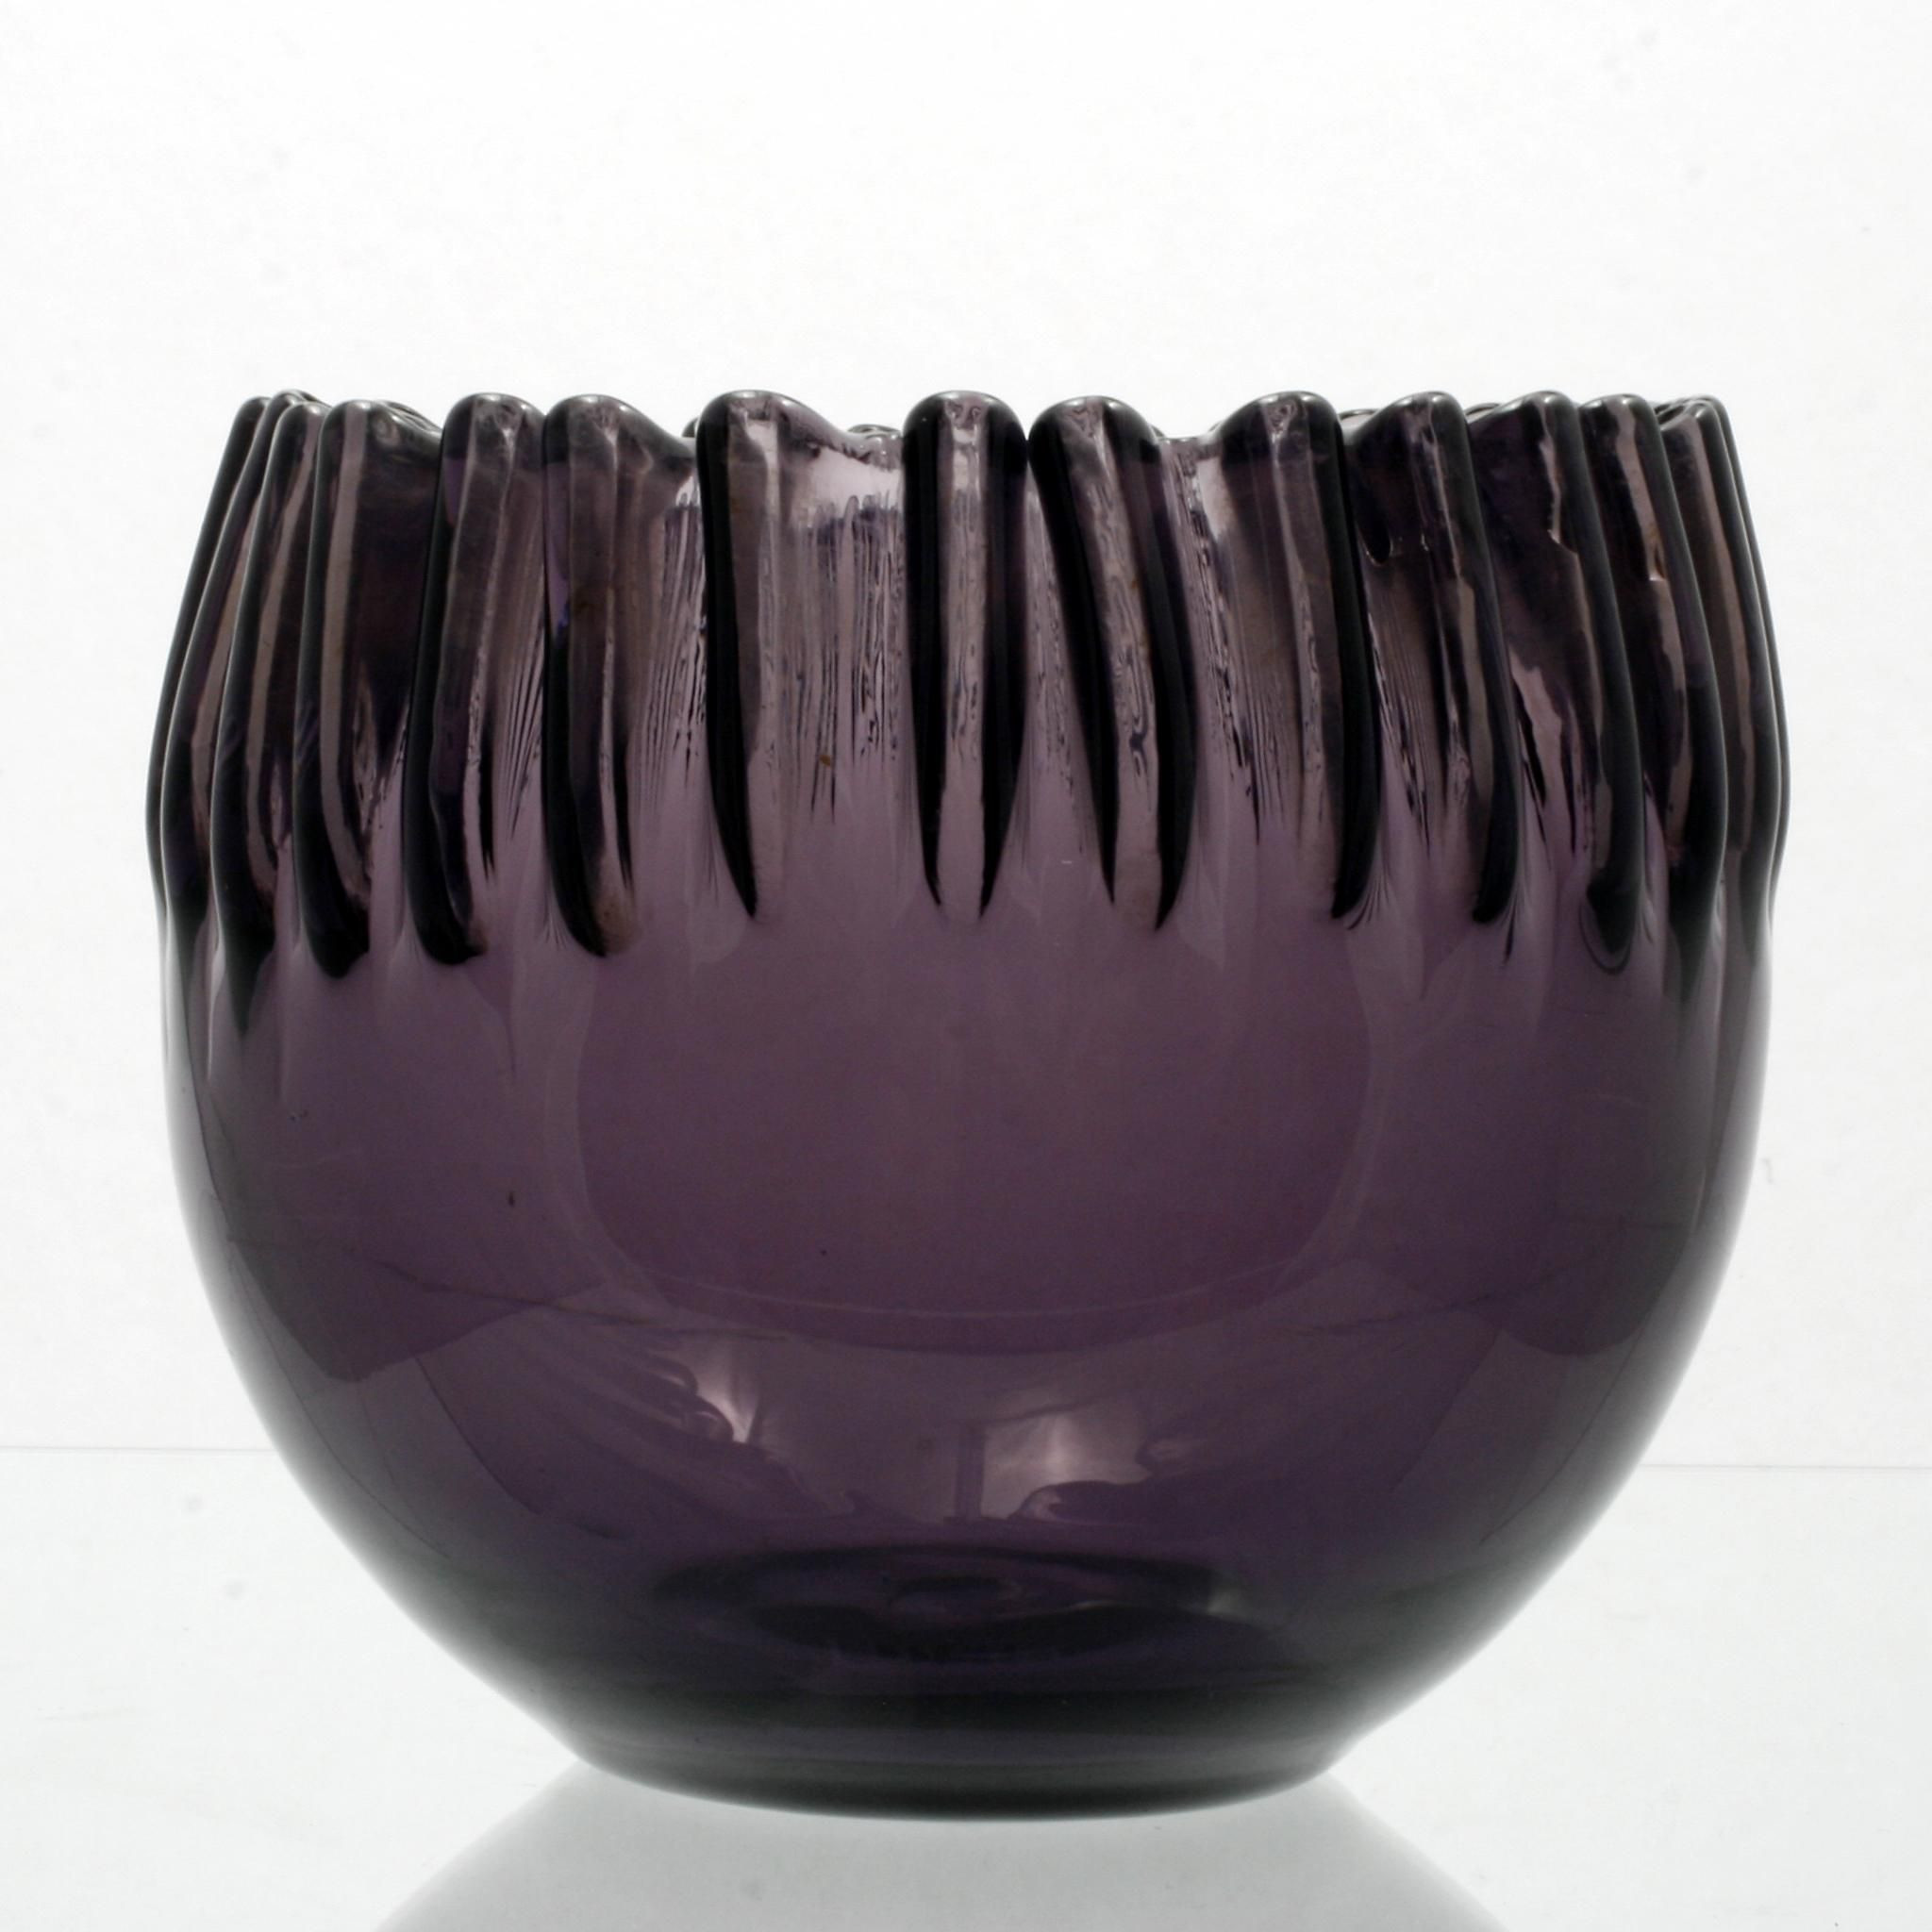 15 Lovable Hand Blown Glass Vases Bowls 2024 free download hand blown glass vases bowls of blenko amethyst art glass bowl crimped 538 anderson mid century pertaining to blenko amethyst art glass bowl crimped 538 anderson mid century modern hand blow